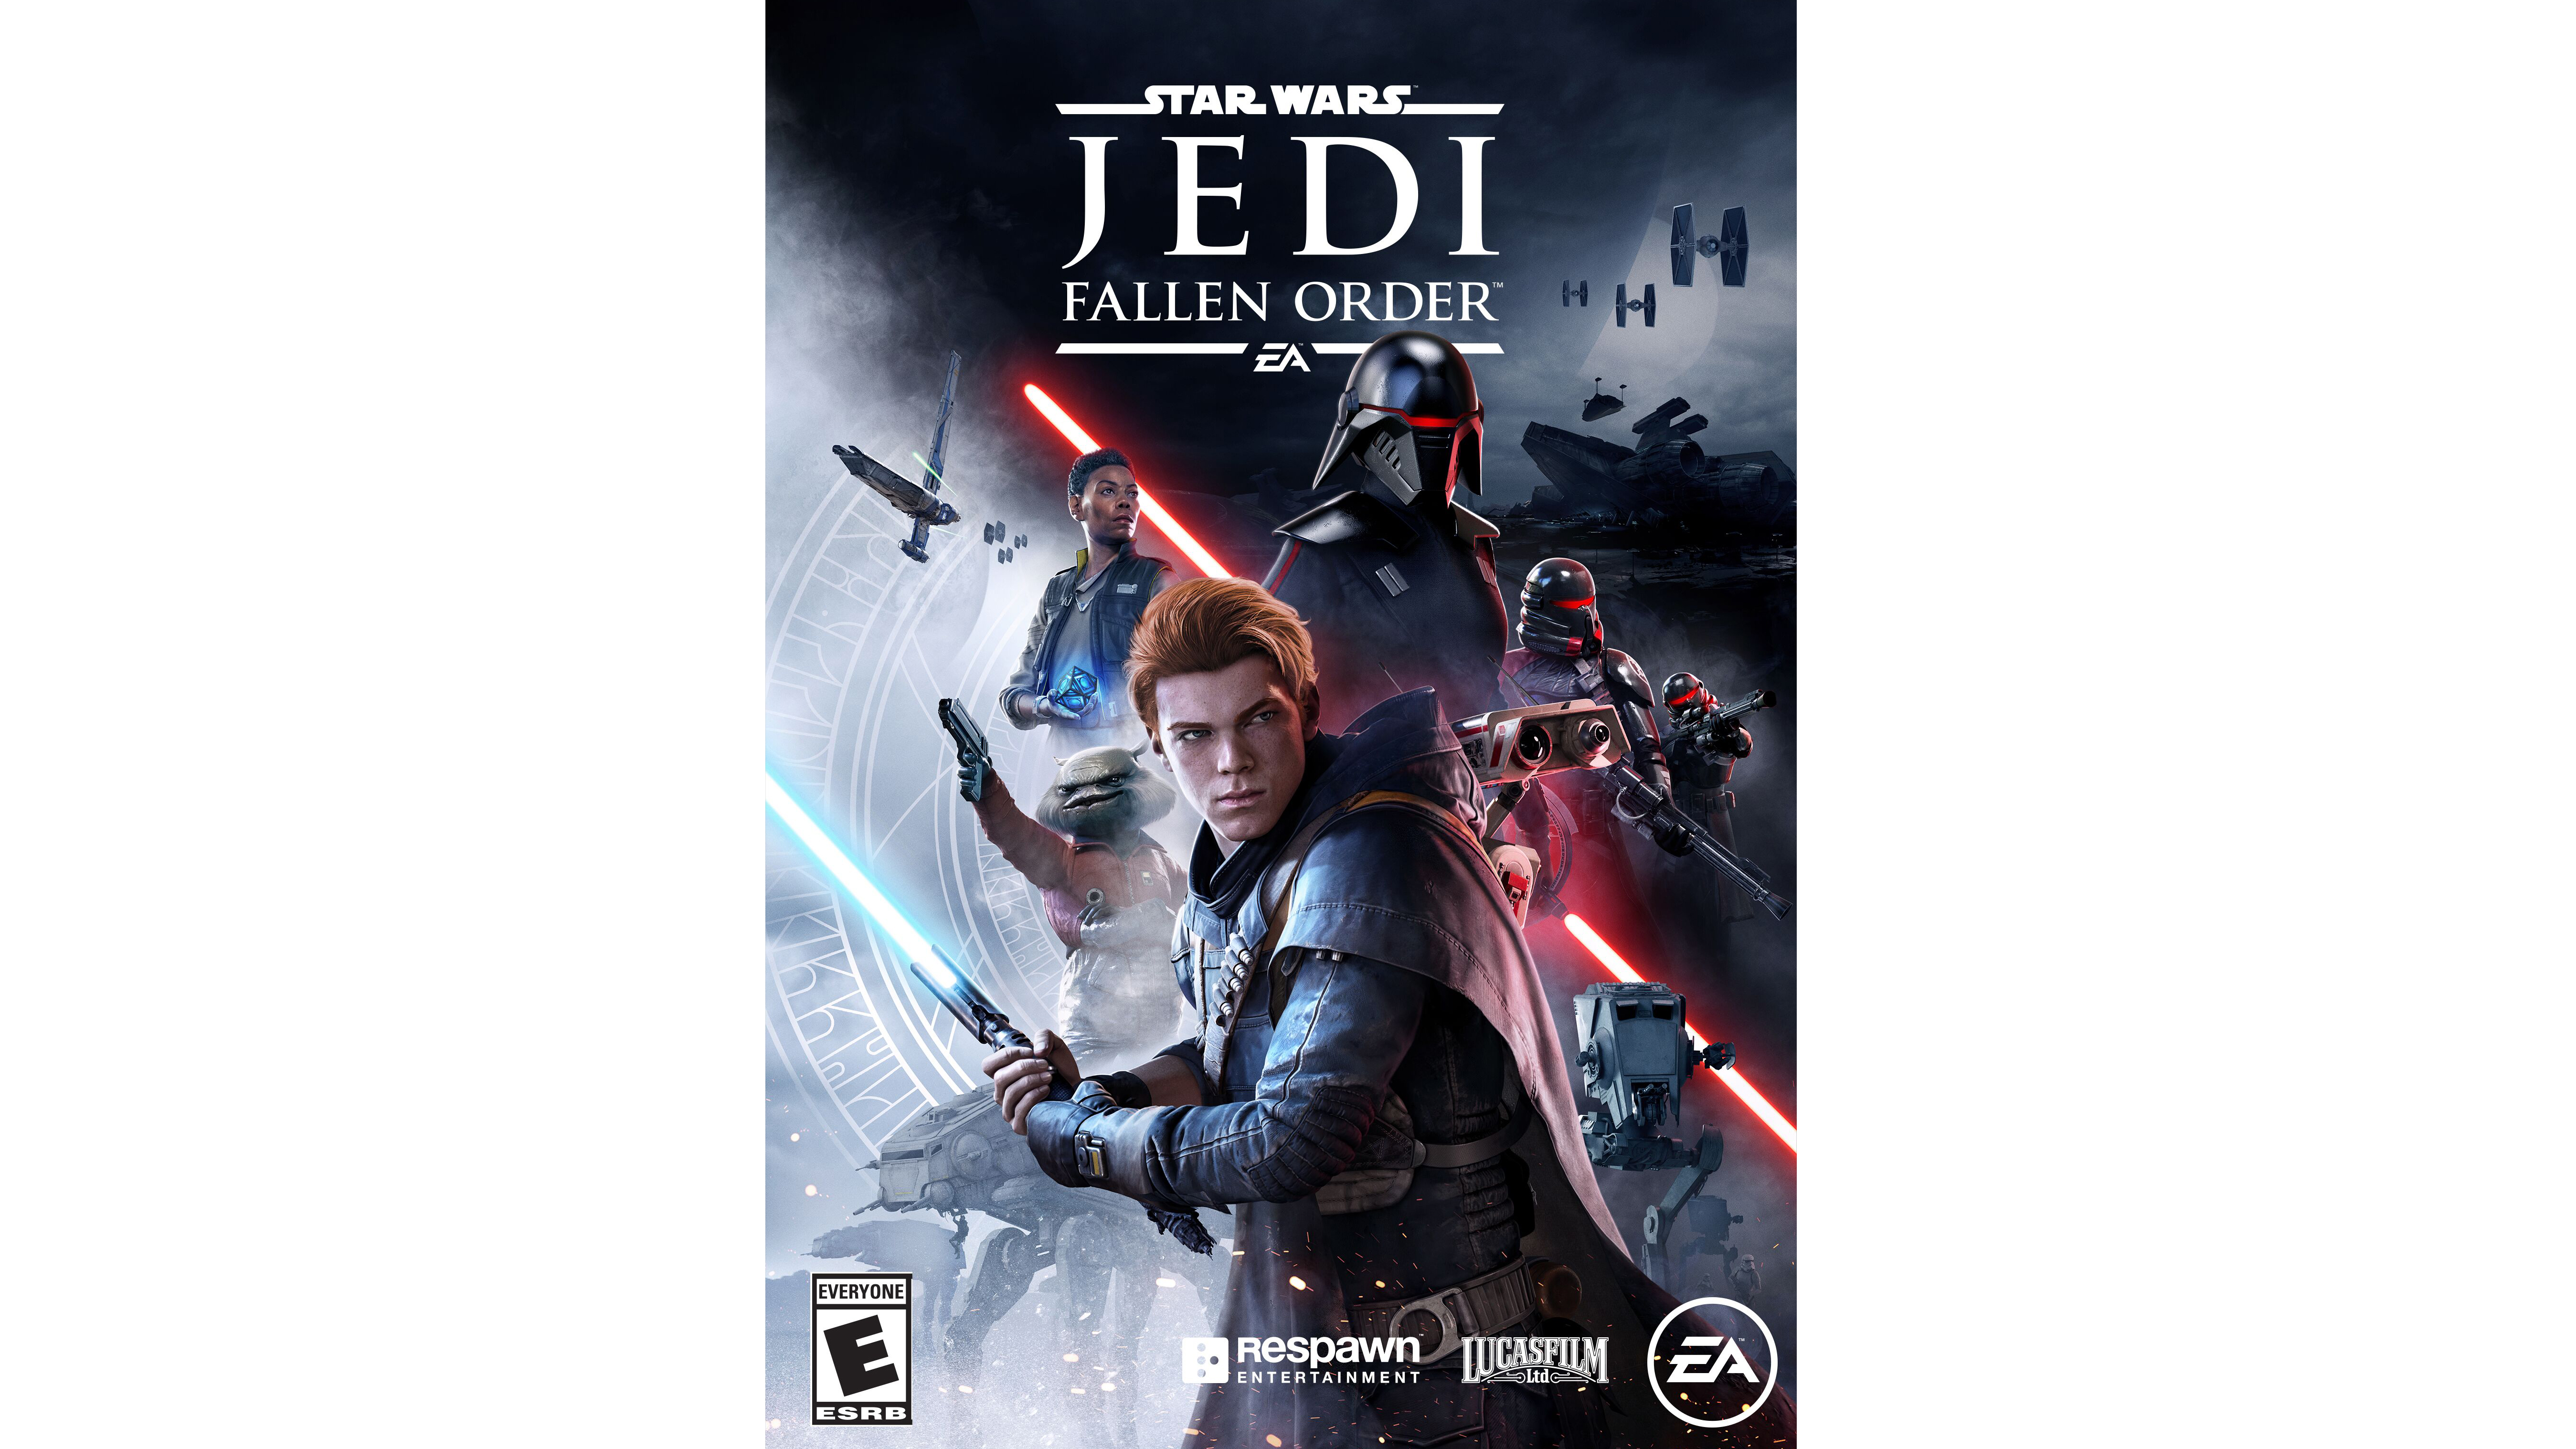 Star Wars Jedi: Fallen Order: Gameplay, Release Date, Trailers and News 2019 7